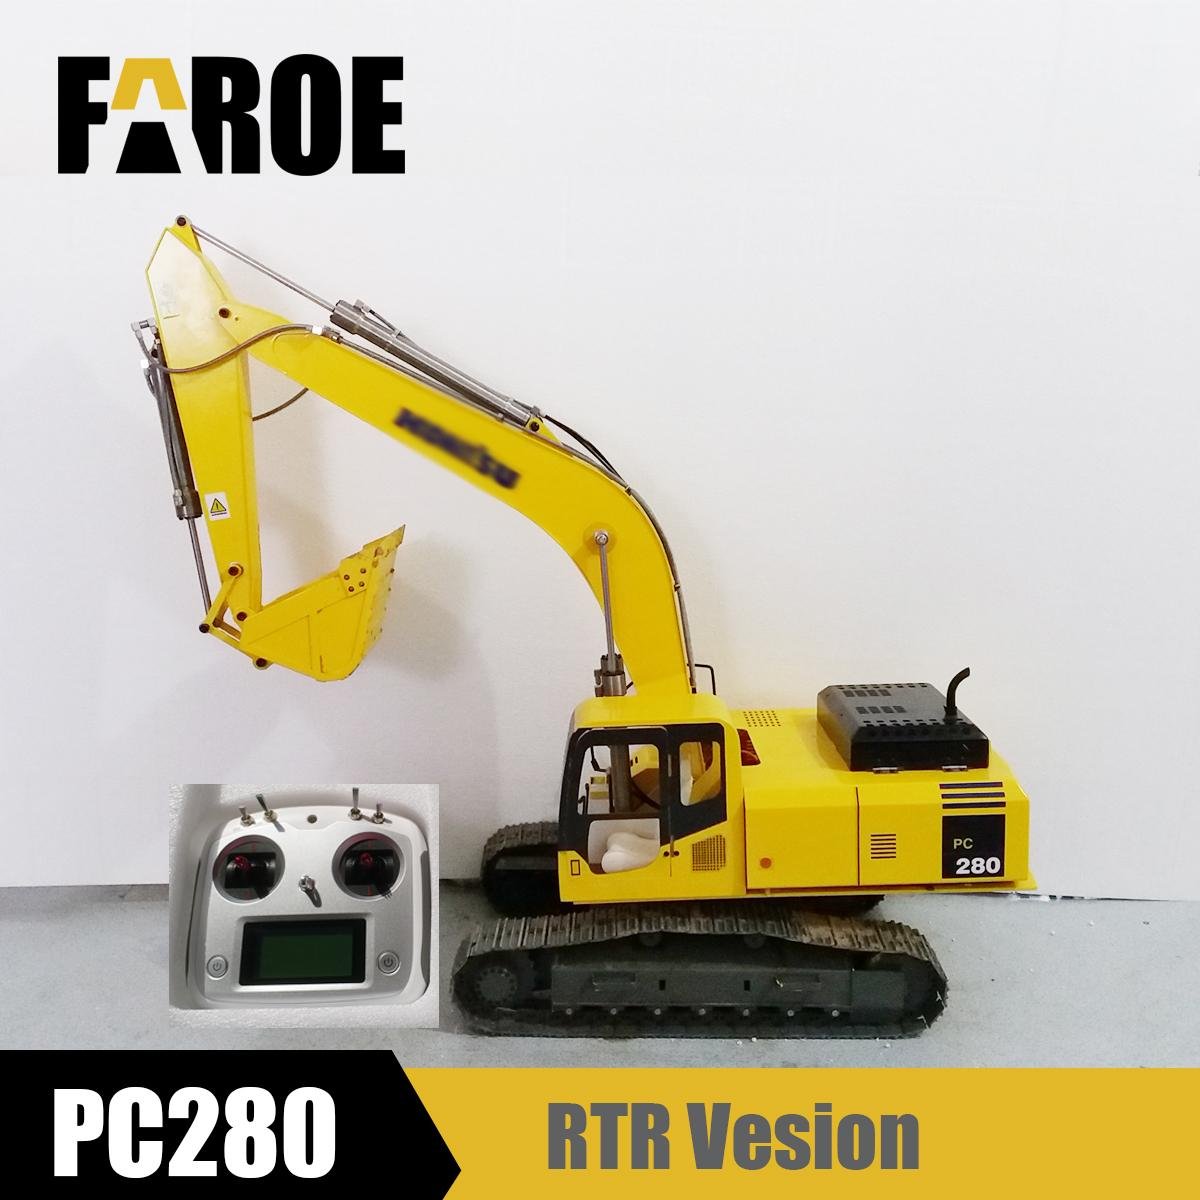 CE certified 1:8 scale Hydraulic RC Excavator model PC280 RTR Version 4